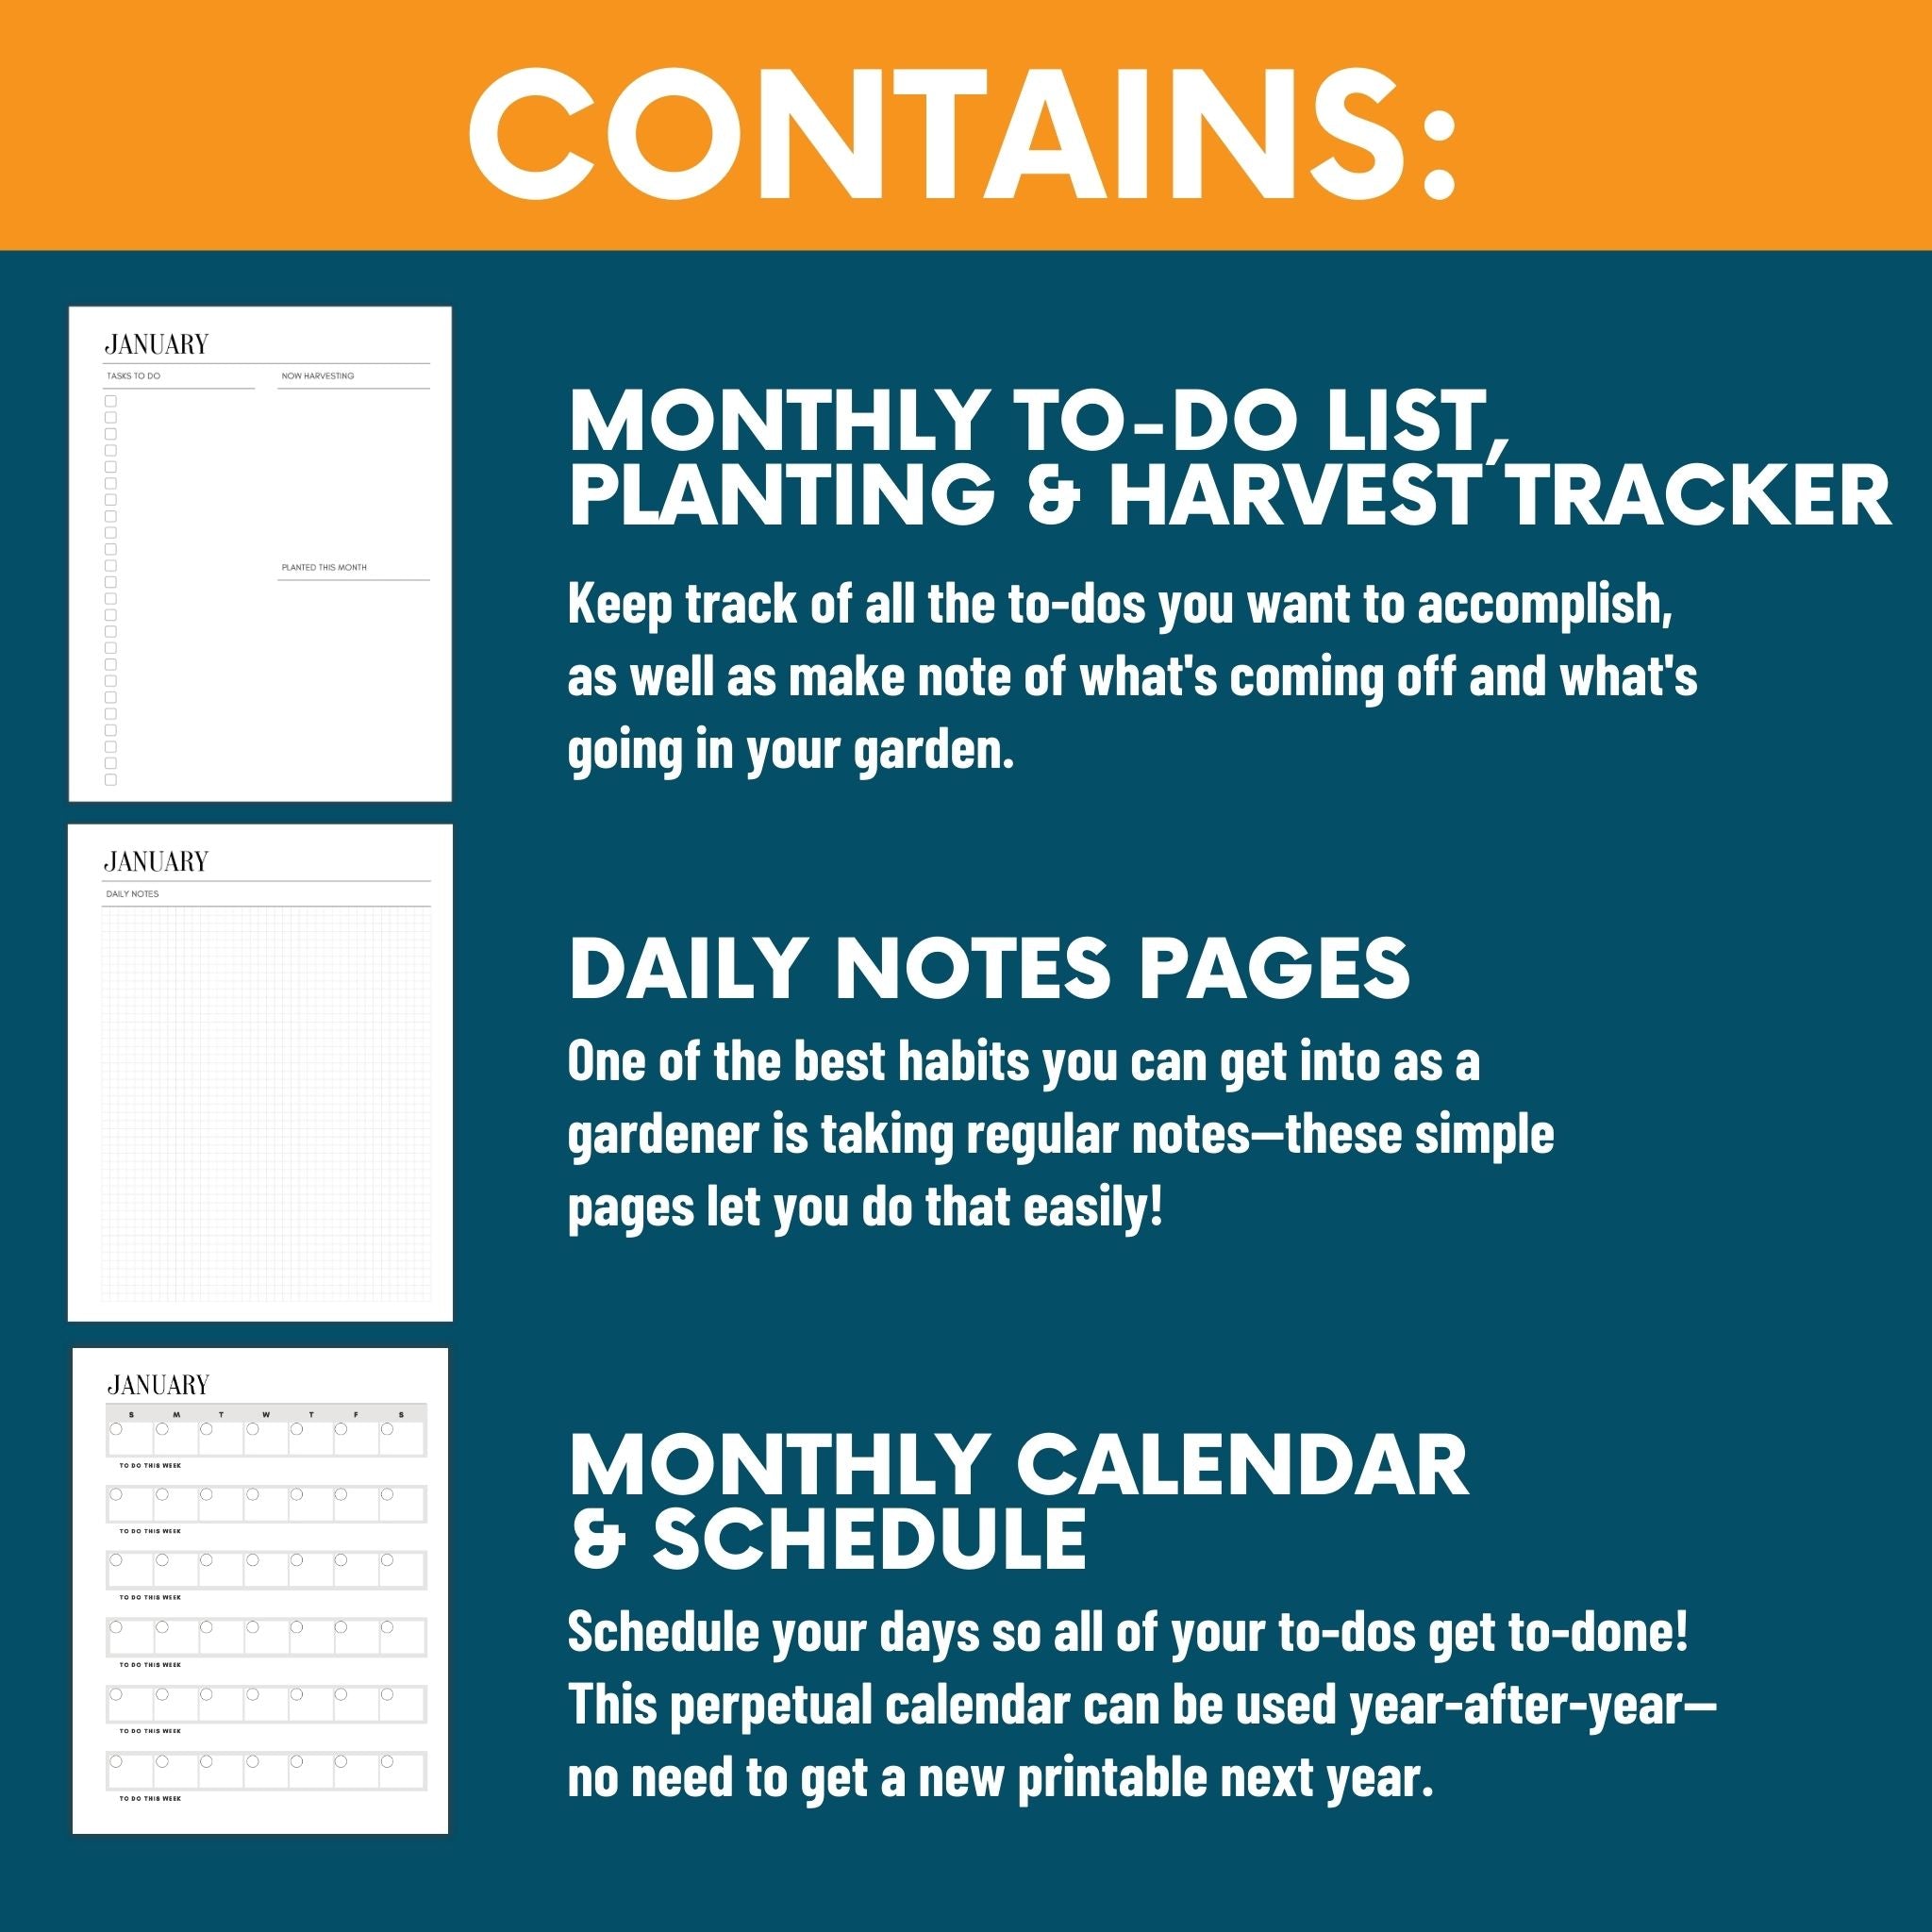 Contains: Monthly To-Do List, Planting, and Harvest Tracker (Keep track of all the to-dos you want to accomplish, as well as make note of what's coming off and what's going in your garden). Daily Notes Pages (One of the best habits you can get into as a gardener is taking regular notes-these simple pages let you do that easily!). Monthly calendar and schedule (Schedule your days so all of your to-dos get to-done! This perpetual calendar can be used year-after-year- no need to get a new printable next year."